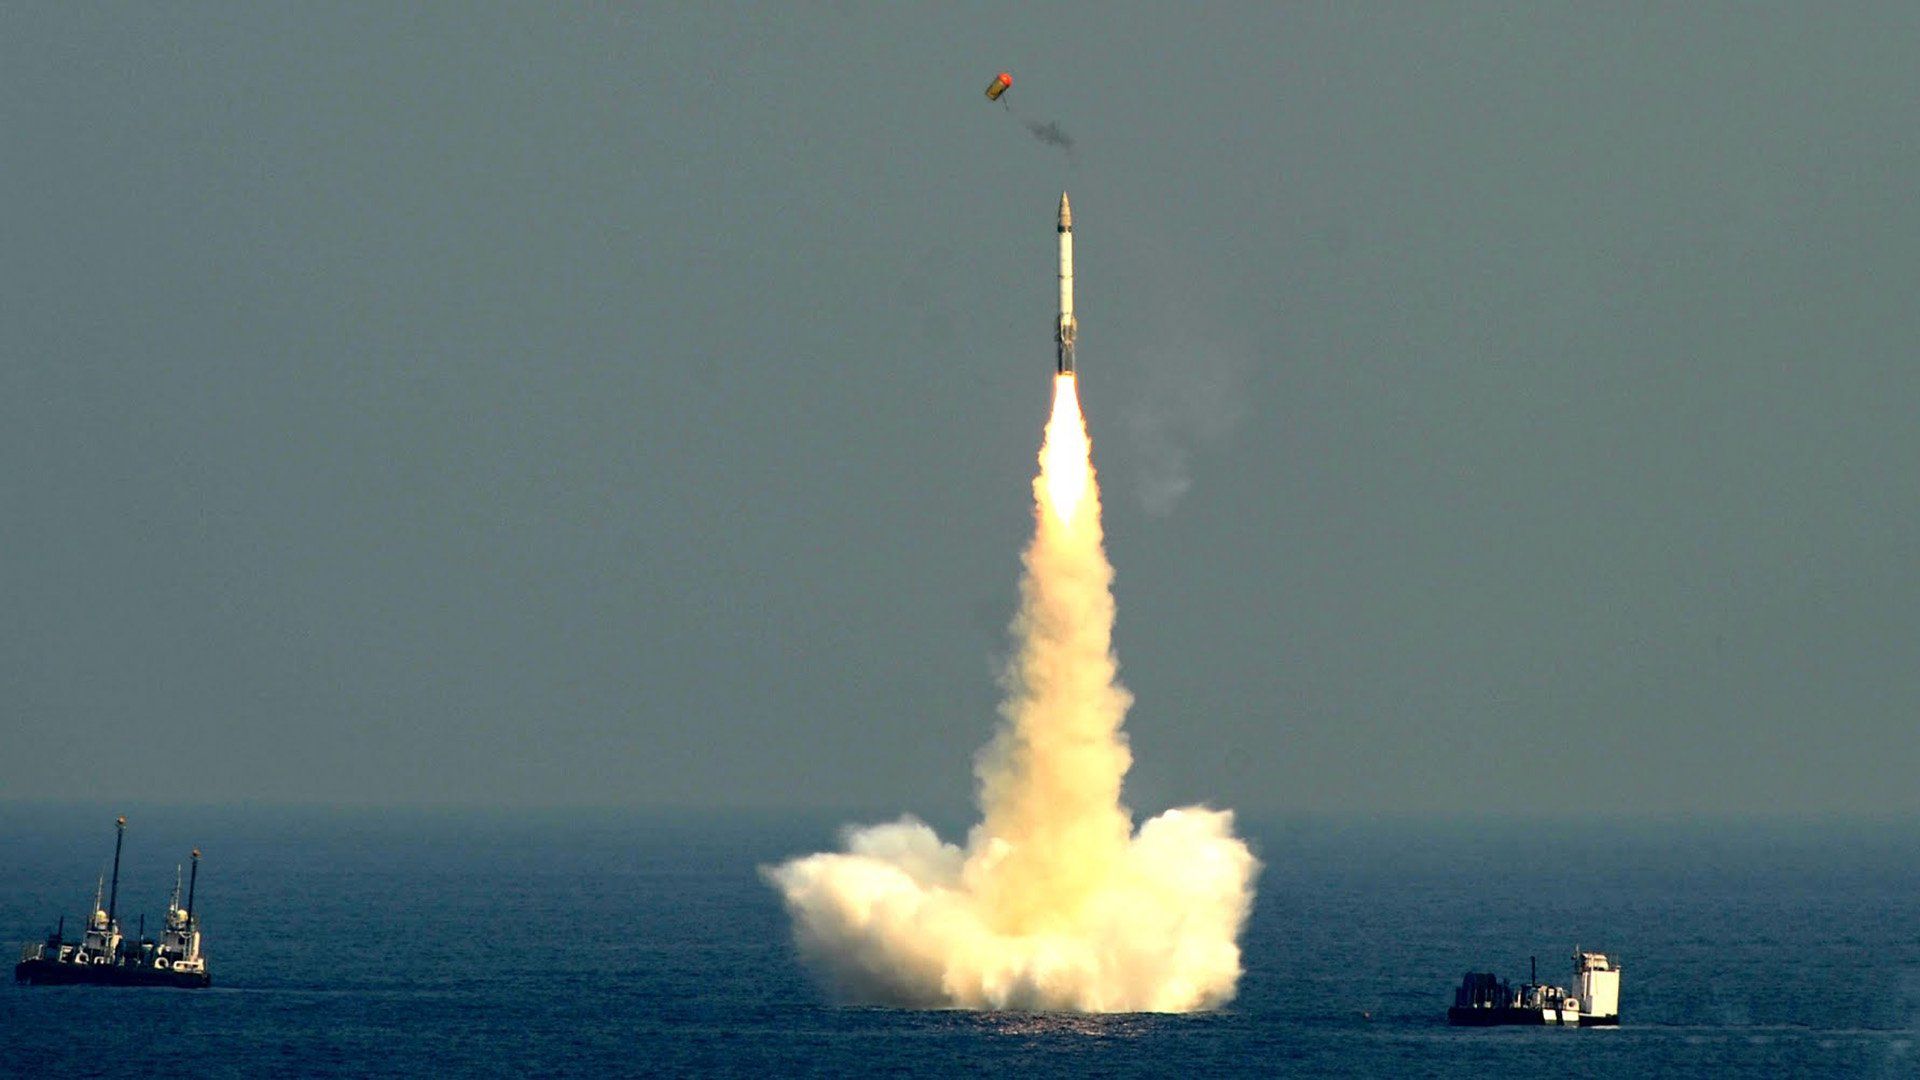 Indian Navy's New K4 Nuclear Ballistic Missile Successfully Test Fired From A Nuclear Submarine Today